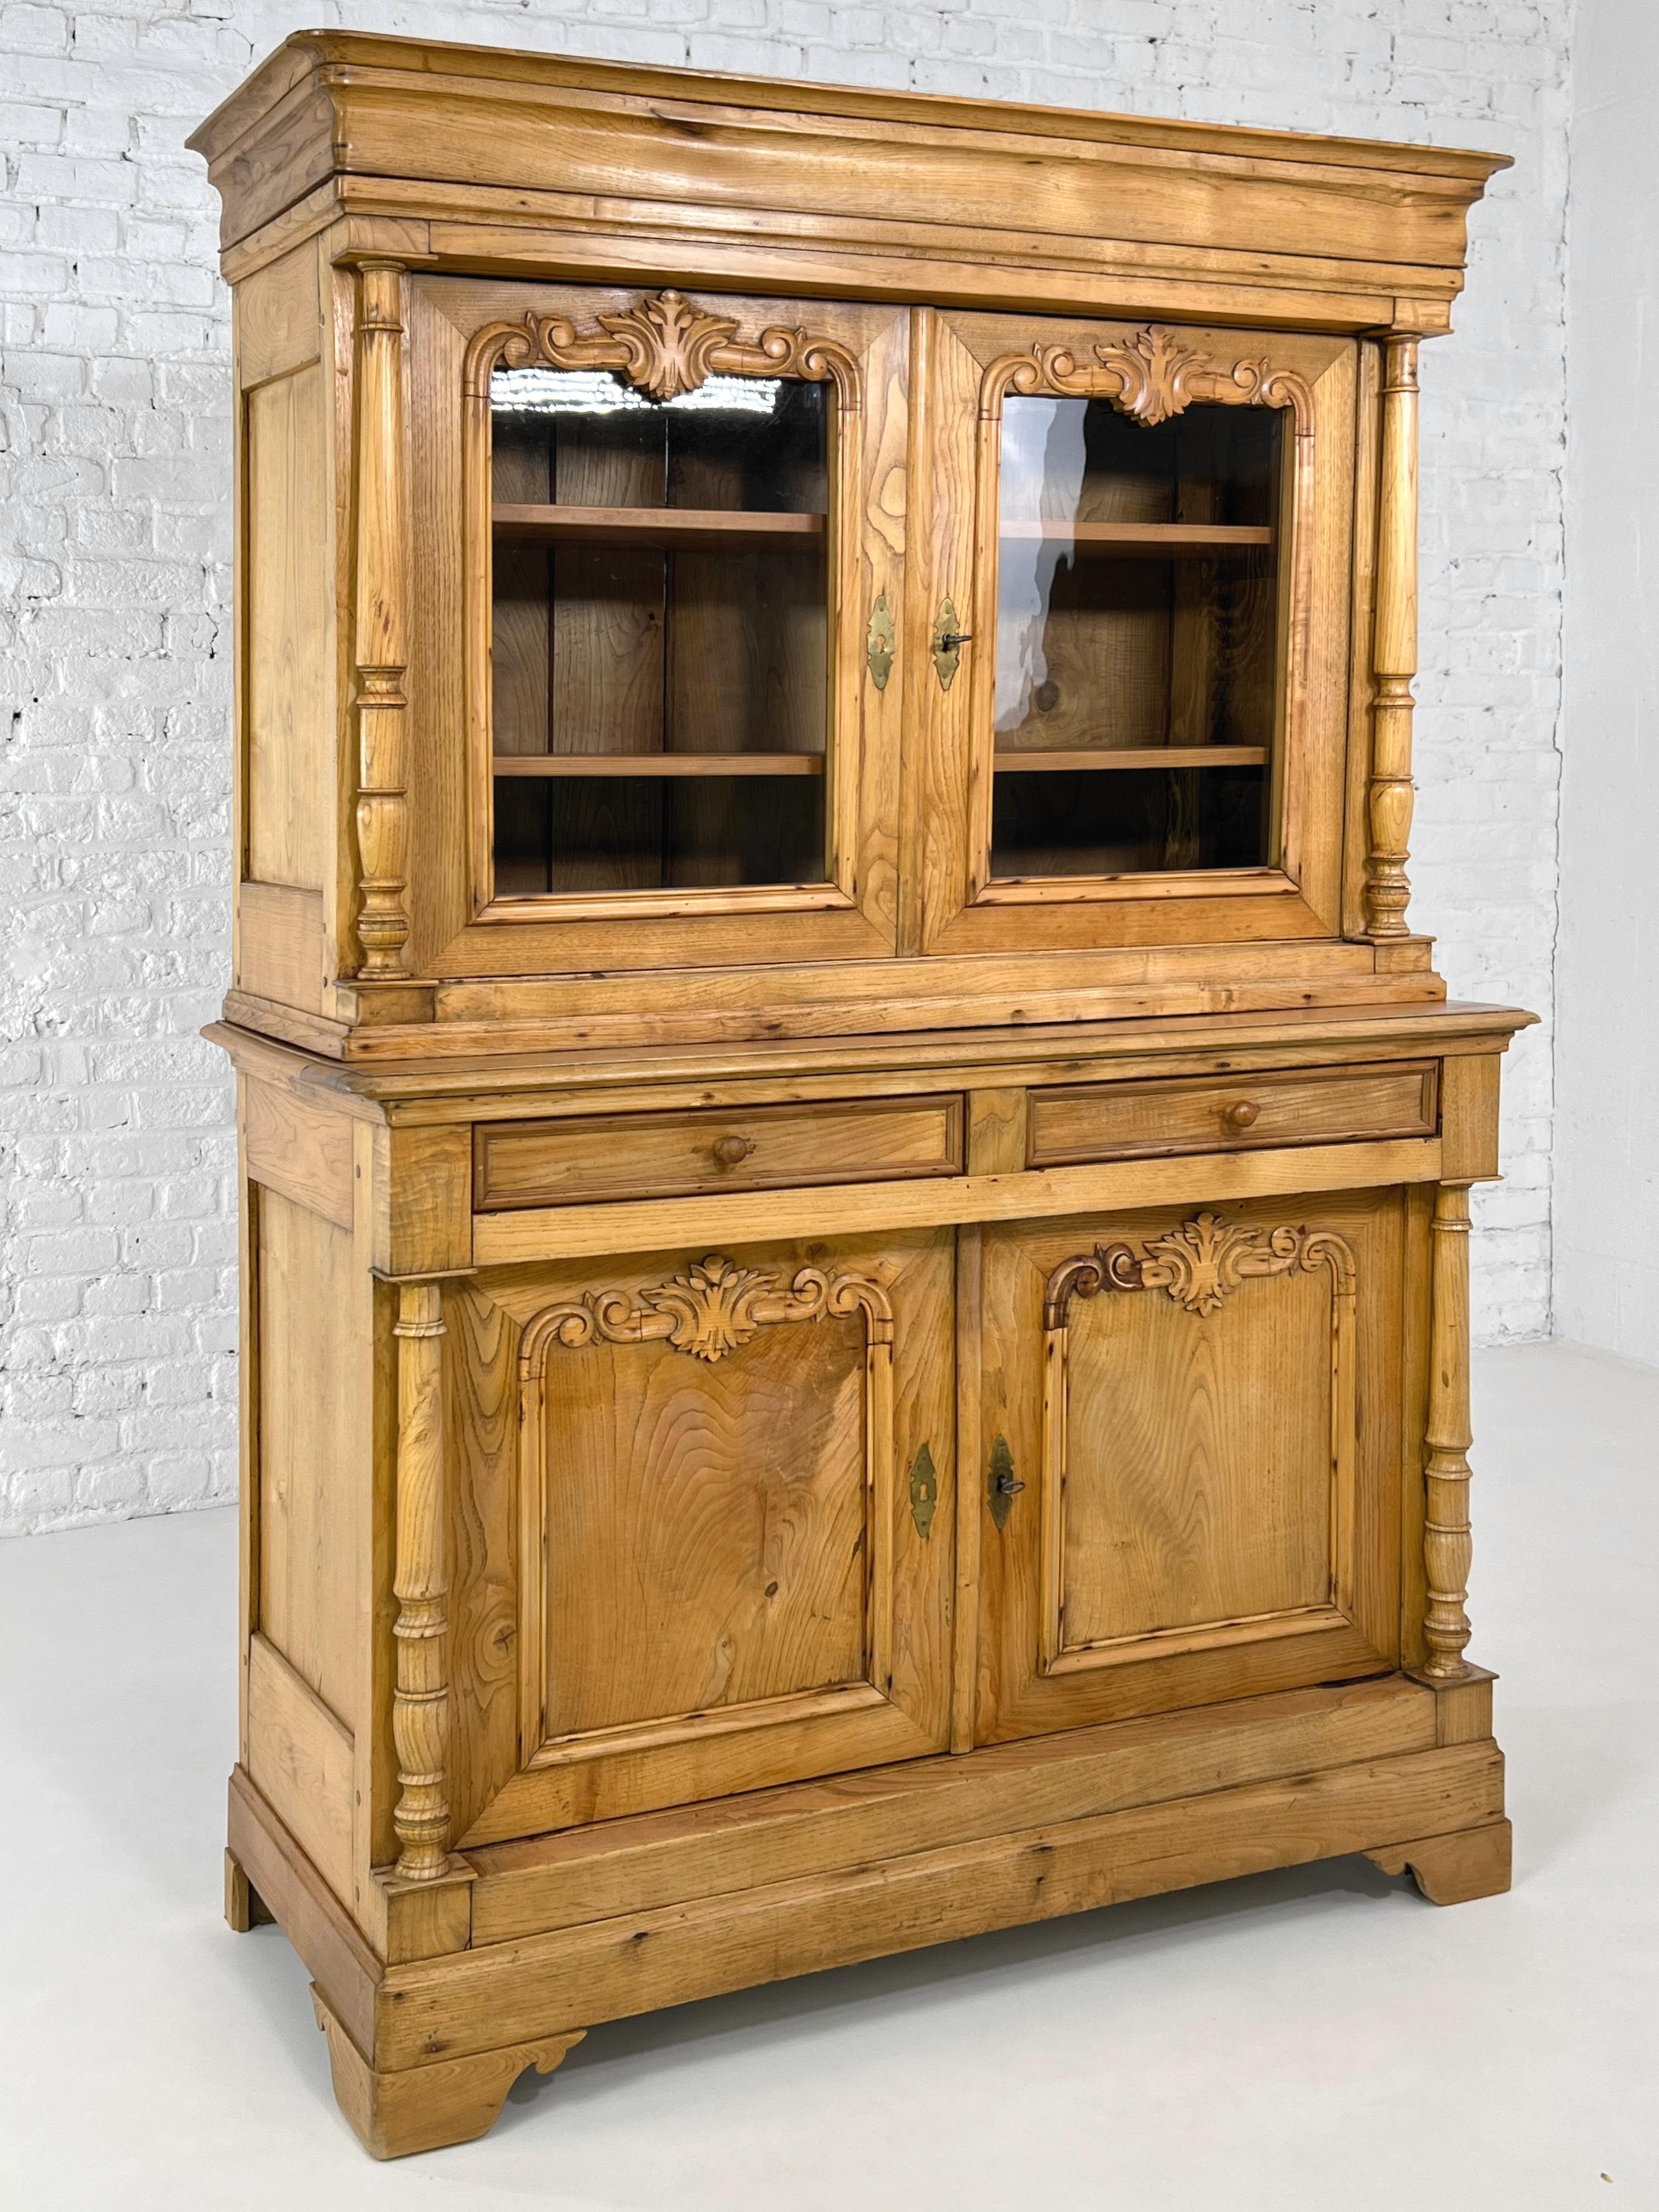 Baroque French Antic Alpine Chalet Chic Pine Wood and Glass Armoire Vitrine Cabinet For Sale